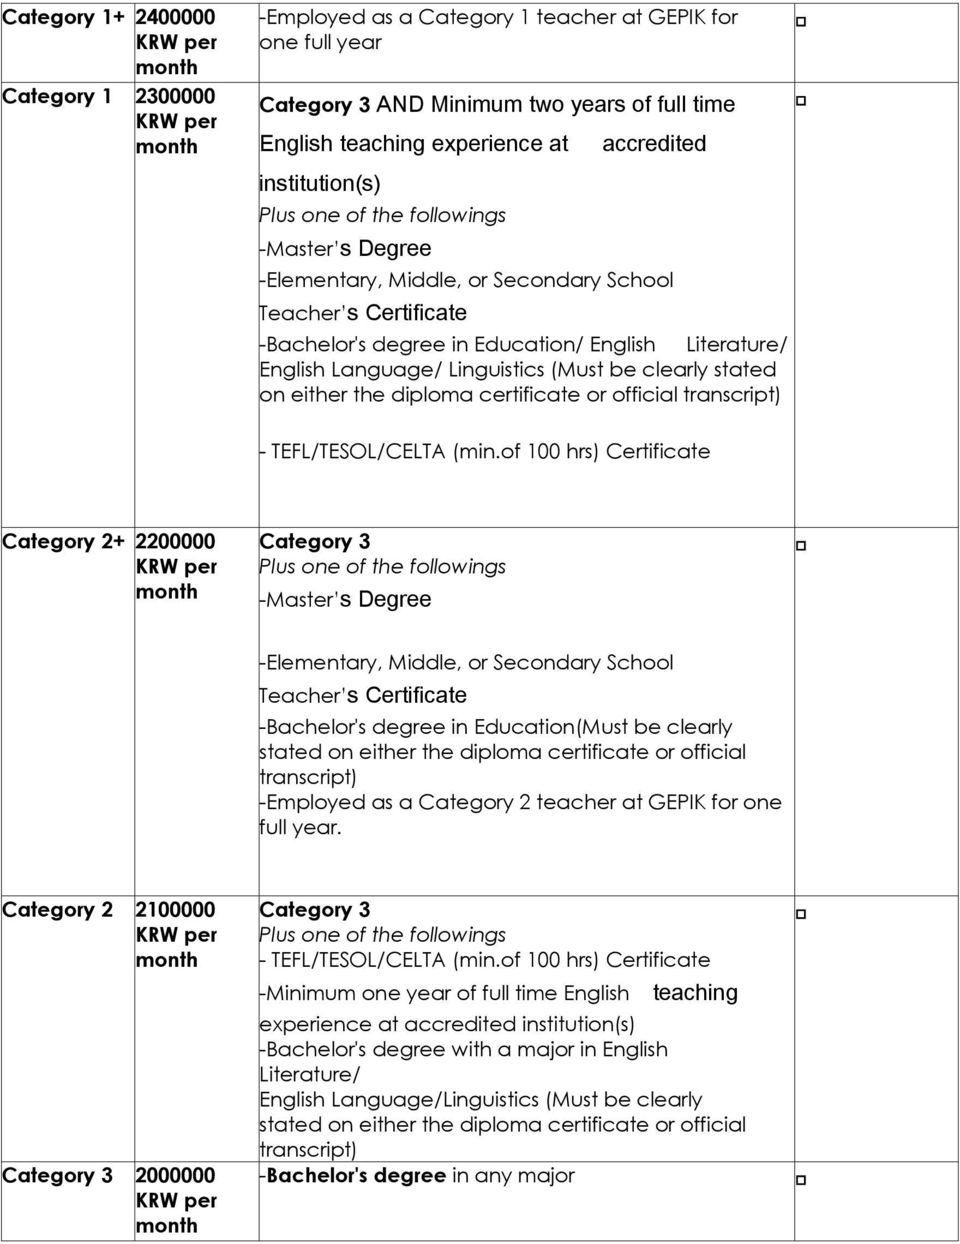 English Language/ Linguistics (Must be clearly stated on either the diploma certificate or official transcript) - TEFL/TESOL/CELTA (min.